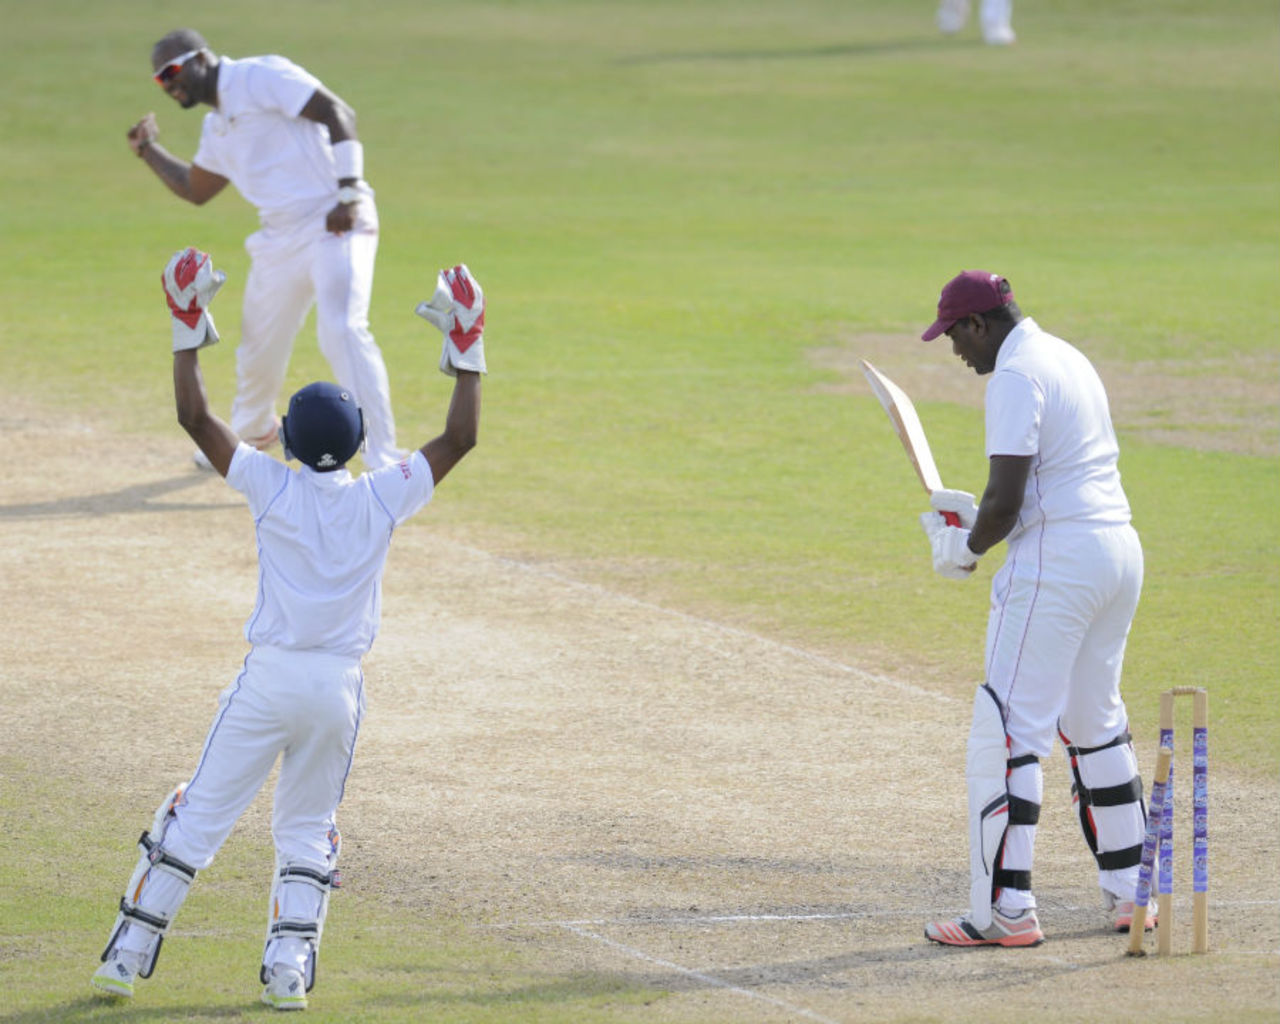 Ashley Nurse celebrates after claiming one of his five wickets, Barbados v Leeward Islands, 2nd day, WICB Regional 4 Day Tournament, Barbados, December 12, 2015